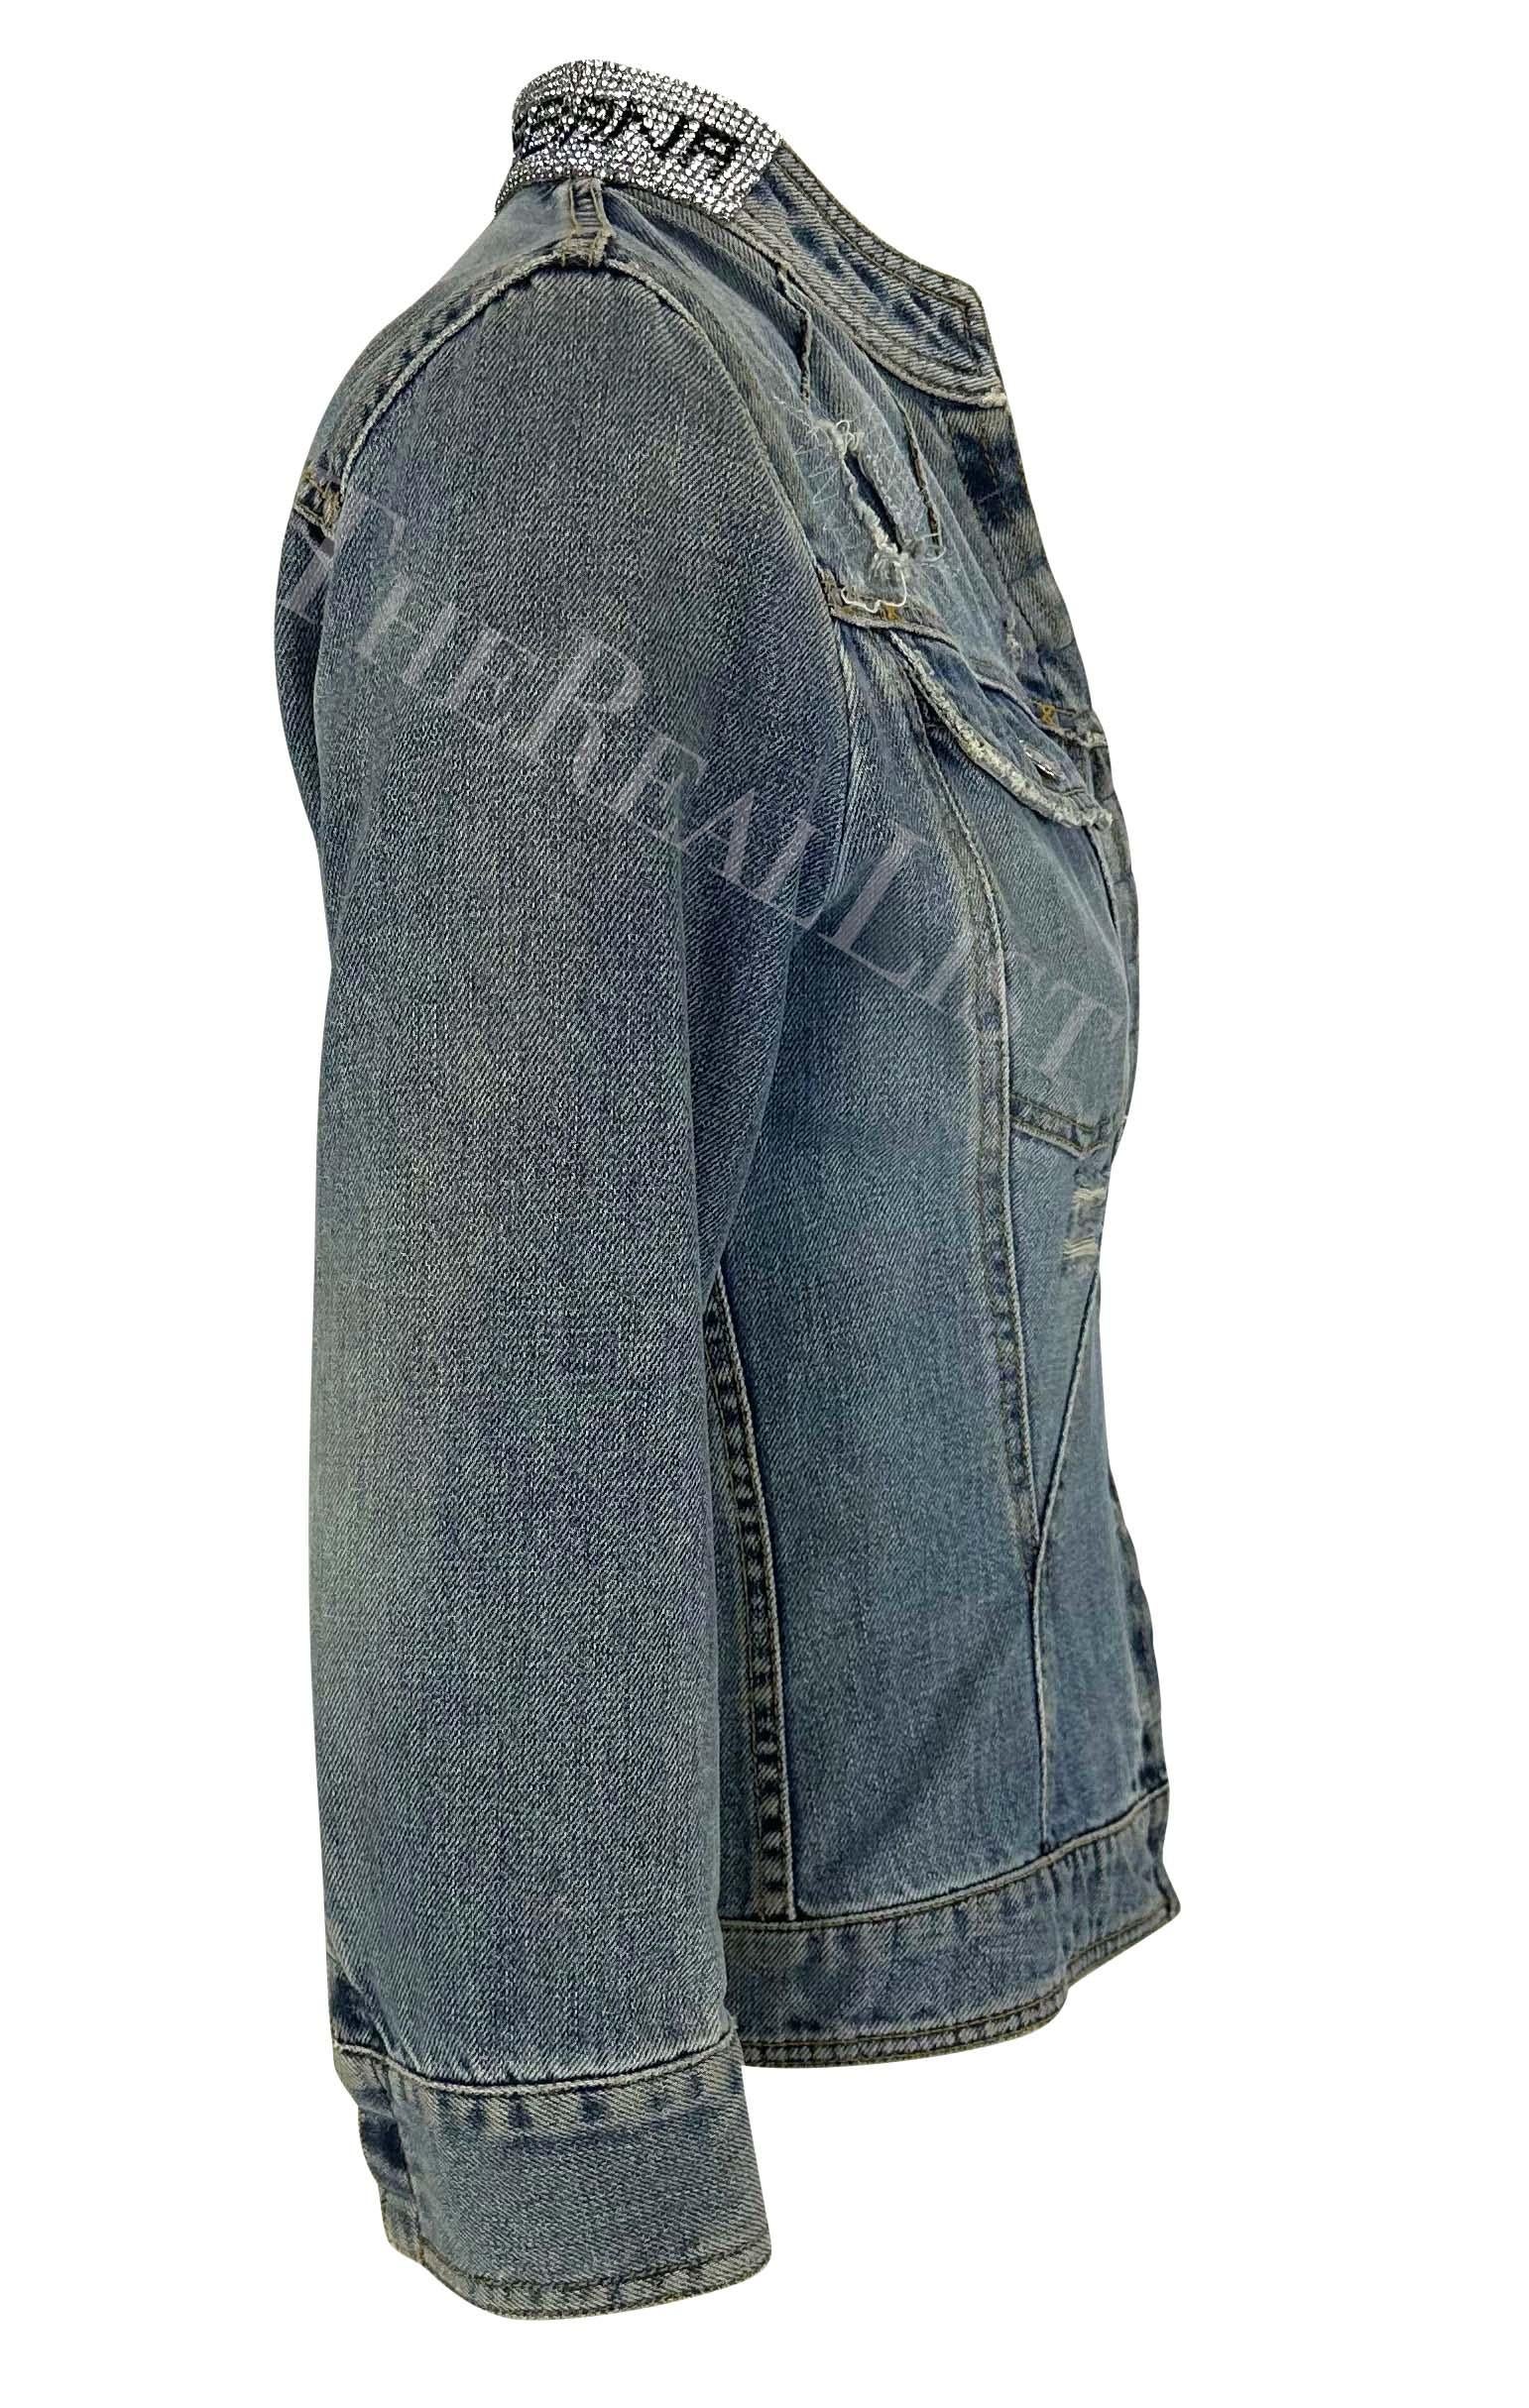 S/S 2003 Dolce & Gabbana Distressed Light Wash Denim Jacket Rhinestone Spell  In Excellent Condition For Sale In West Hollywood, CA